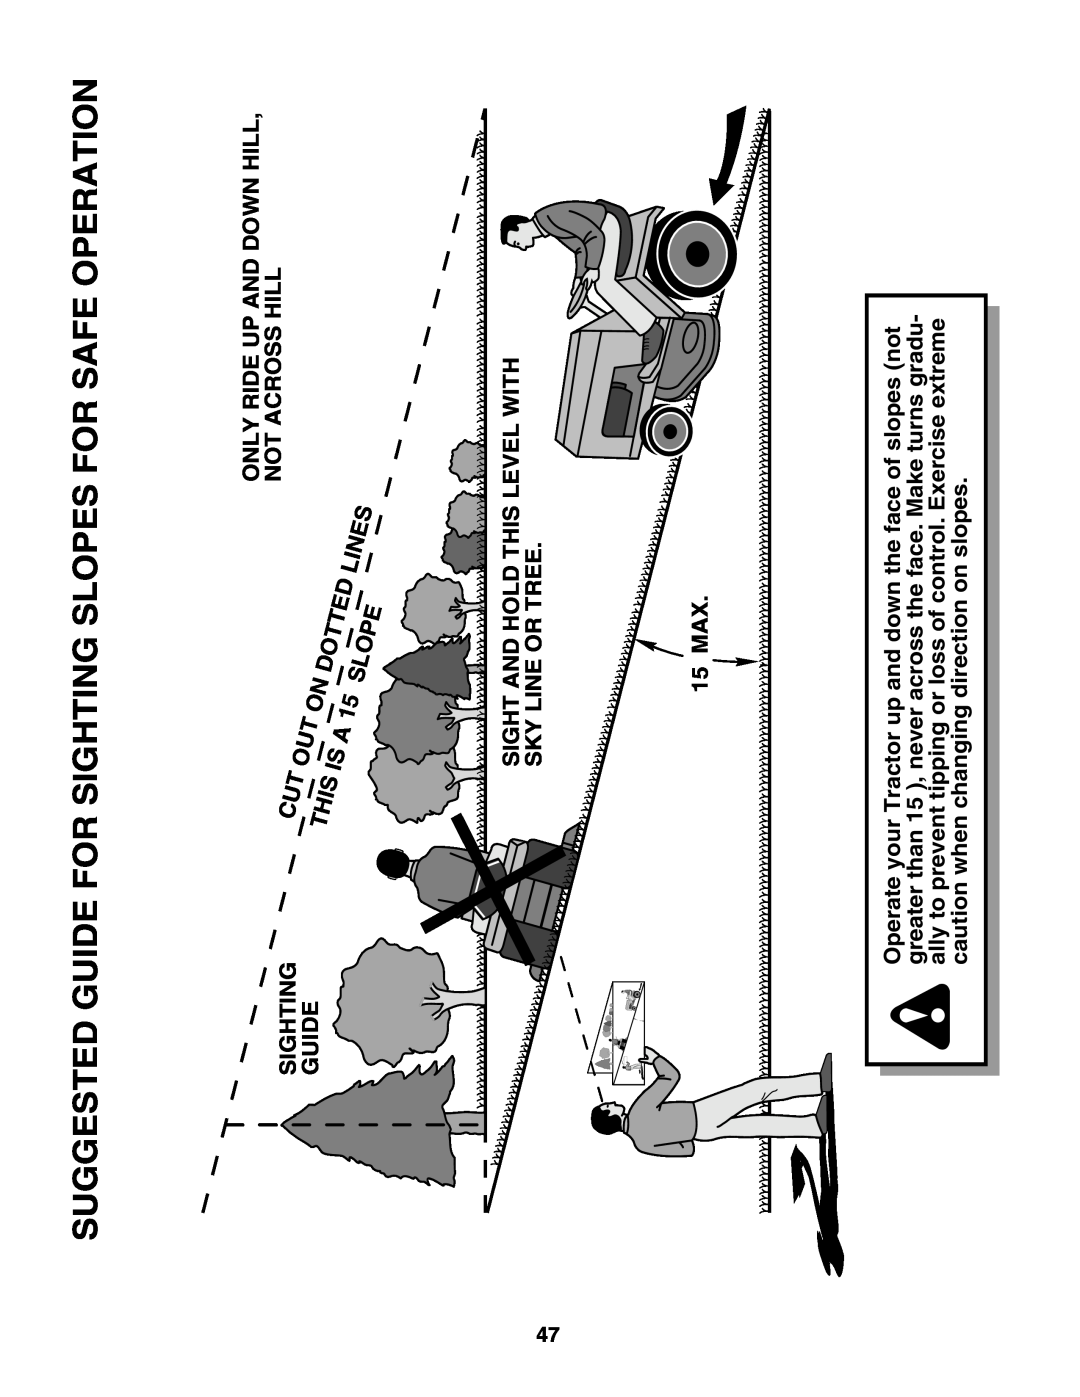 Poulan 179416 manual Suggested Guide For Sighting Slopes For Safe Operation 